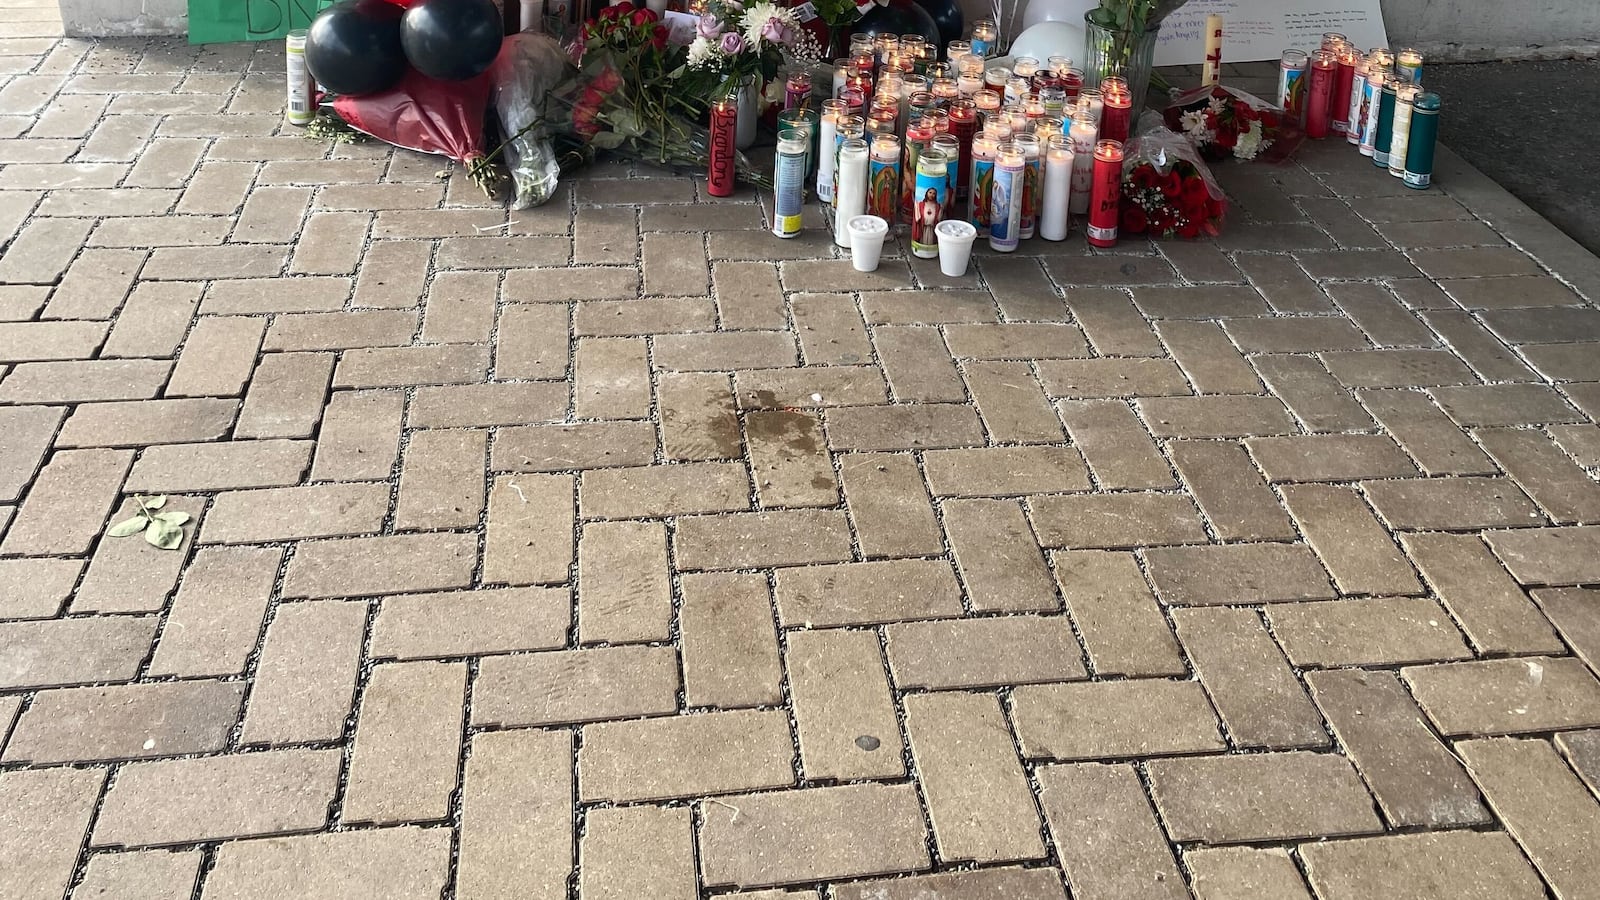 Signs mentioning Brandon Perez and Nathan Billegas hang on the wall. On the ground, there are balloons, candles, and flowers for a memorial to the two students at Benito Juarez High School in Chicago.